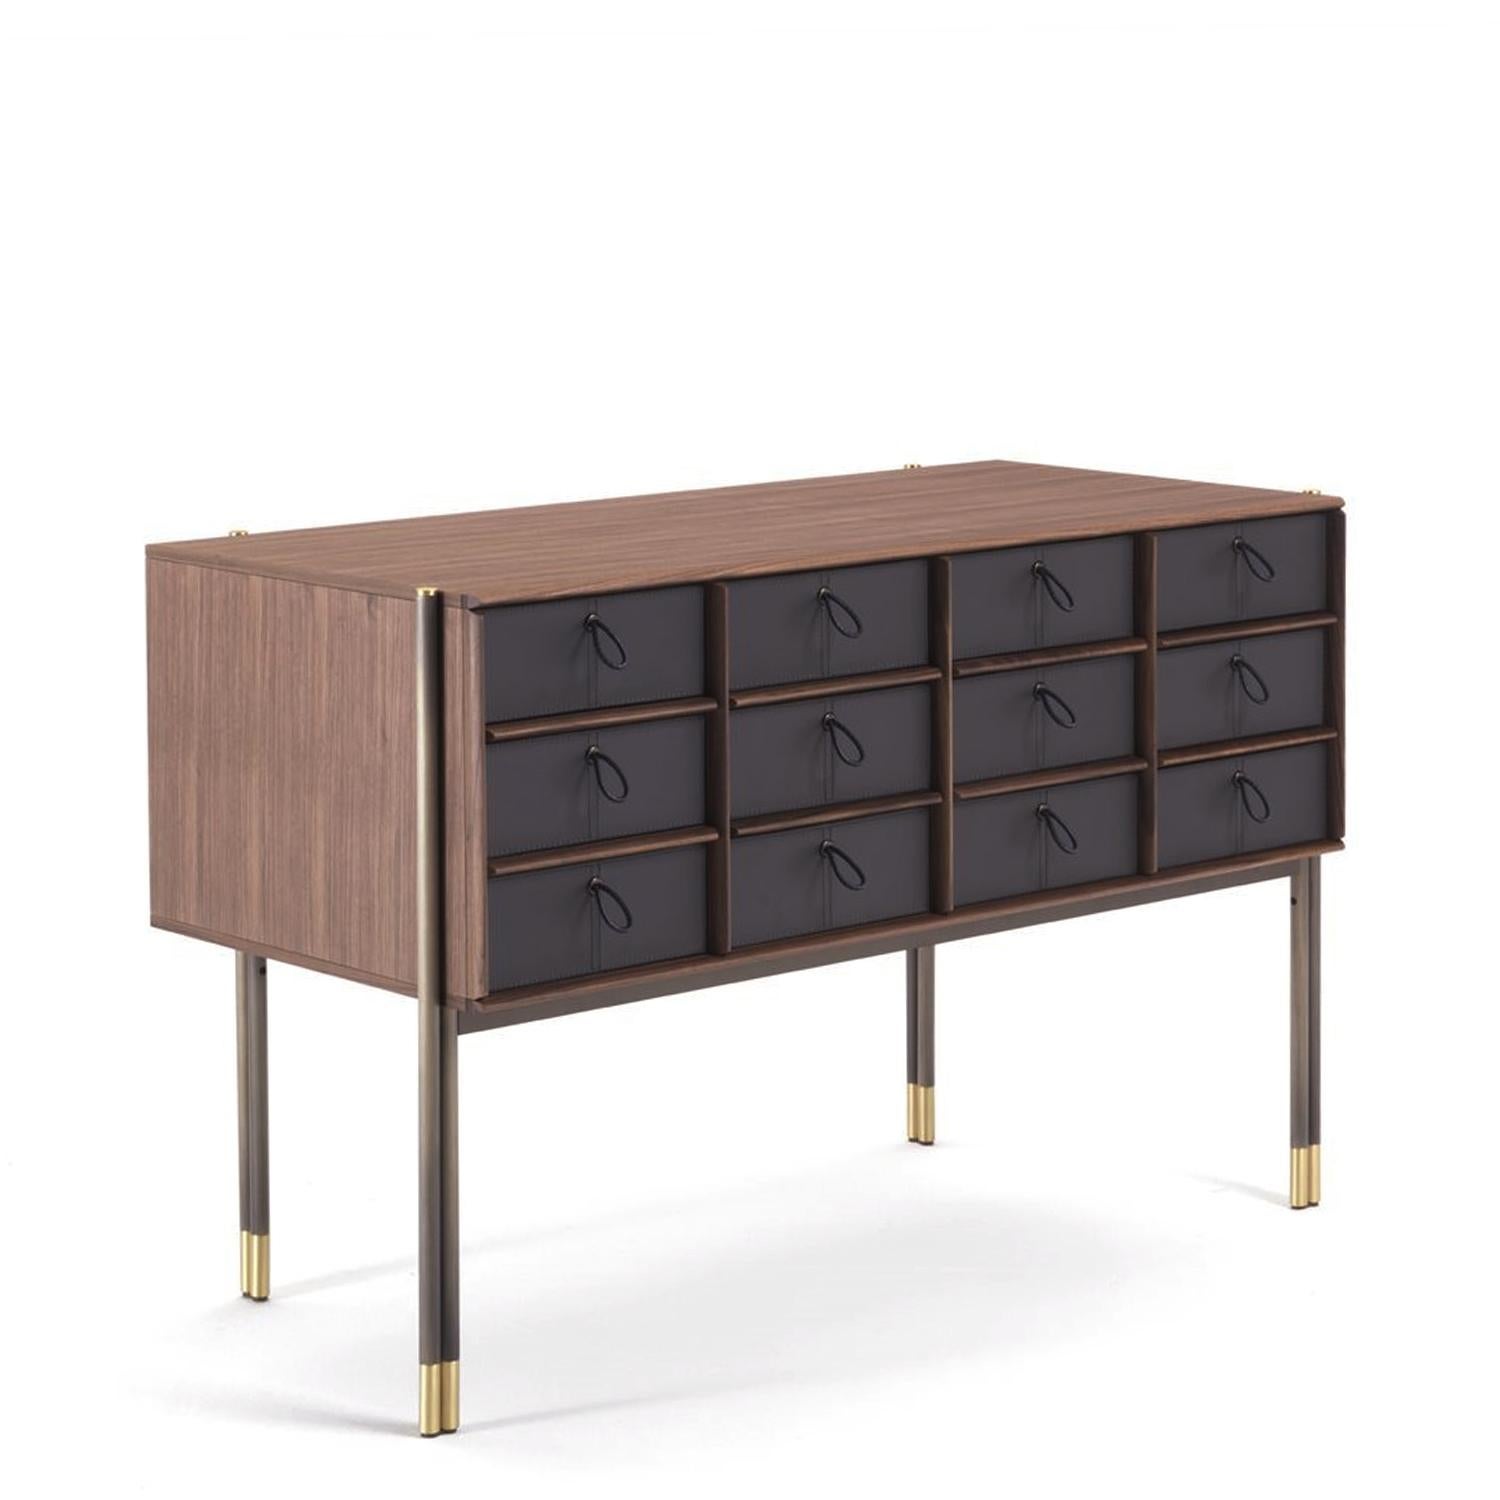 Console table Reda big with top structure in solid walnut 
with 12 drawers in genuine leather in dark grey finish
with genuine braided leather handles in black finish.
With metal legs in bronzed metal with solid brass end-
feet in brushed